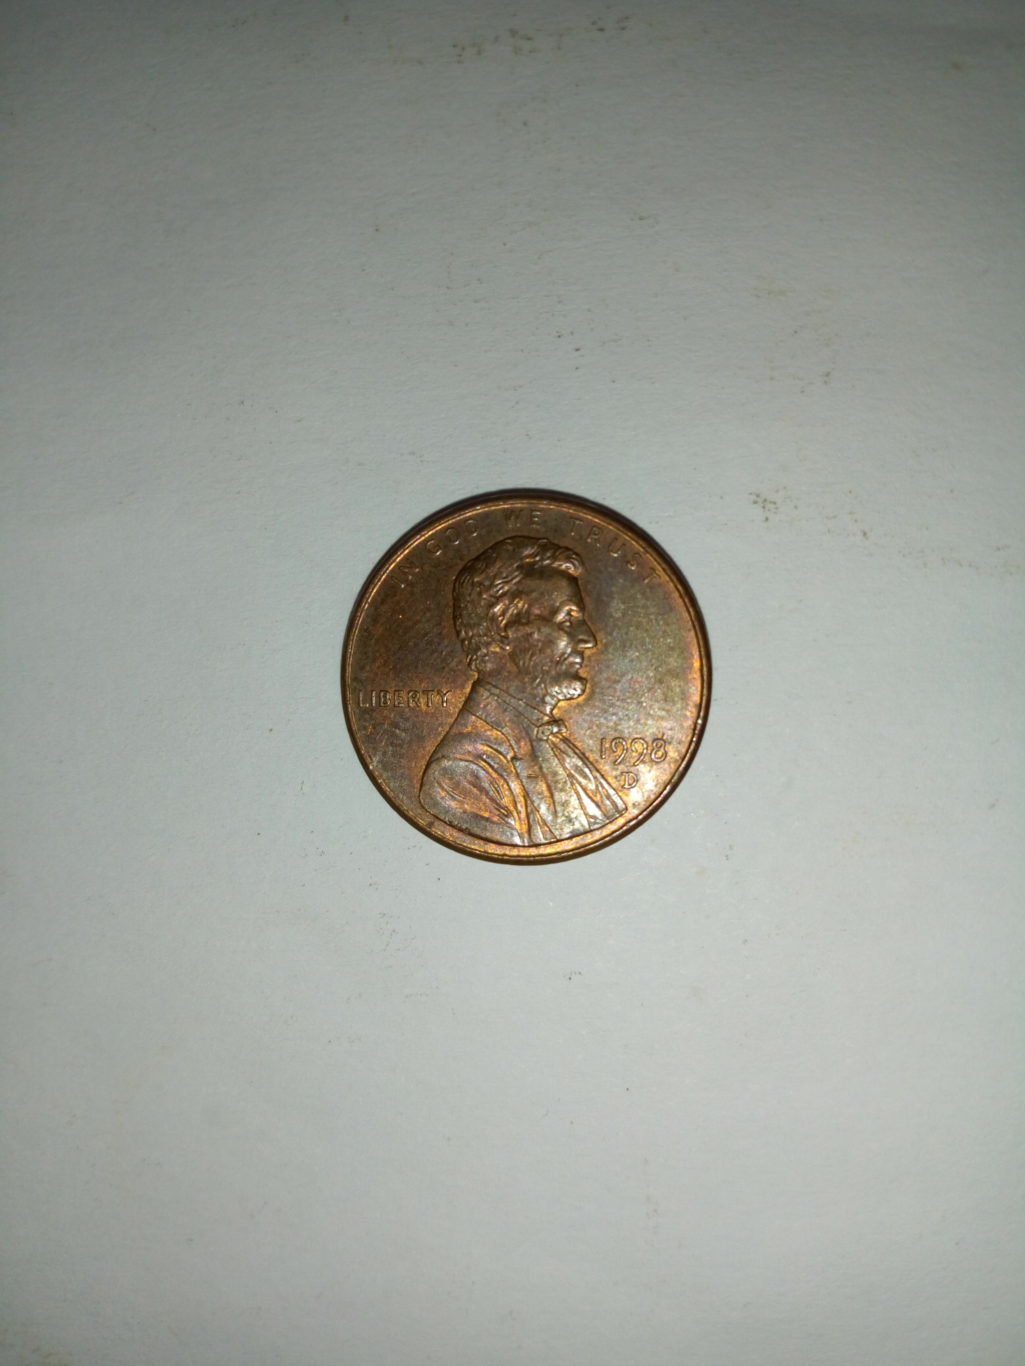 1998_united States of america 1 cents